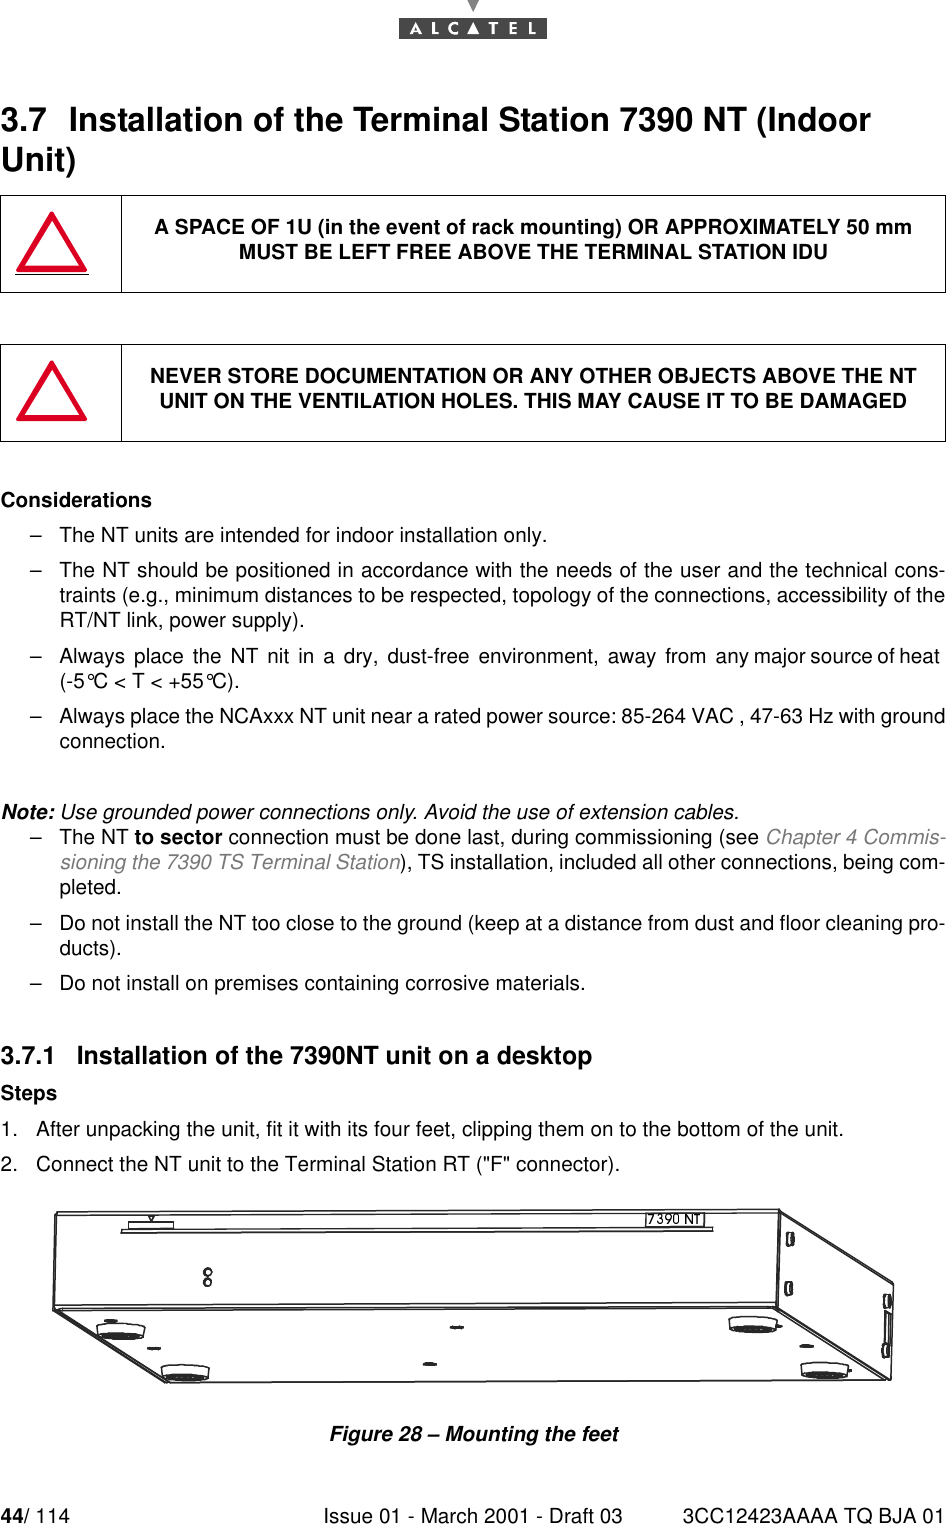 44/ 114 Issue 01 - March 2001 - Draft 03 3CC12423AAAA TQ BJA 01523.7  Installation of the Terminal Station 7390 NT (Indoor Unit)Considerations–The NT units are intended for indoor installation only.–The NT should be positioned in accordance with the needs of the user and the technical cons-traints (e.g., minimum distances to be respected, topology of the connections, accessibility of theRT/NT link, power supply).–Always  place  the  NT  nit  in  a  dry,  dust-free  environment,  away  from  any major source of heat(-5°C&lt;T&lt;+55°C).–Always place the NCAxxx NT unit near a rated power source: 85-264 VAC , 47-63 Hz with groundconnection.Note: Use grounded power connections only. Avoid the use of extension cables.–The NT to sector connection must be done last, during commissioning (see Chapter 4 Commis-sioning the 7390 TS Terminal Station), TS installation, included all other connections, being com-pleted.–Do not install the NT too close to the ground (keep at a distance from dust and floor cleaning pro-ducts).–Do not install on premises containing corrosive materials.3.7.1   Installation of the 7390NT unit on a desktopSteps1. After unpacking the unit, fit it with its four feet, clipping them on to the bottom of the unit.2. Connect the NT unit to the Terminal Station RT (&quot;F&quot; connector).Figure 28 – Mounting the feetA SPACE OF 1U (in the event of rack mounting) OR APPROXIMATELY 50 mmMUST BE LEFT FREE ABOVE THE TERMINAL STATION IDUNEVER STORE DOCUMENTATION OR ANY OTHER OBJECTS ABOVE THE NTUNIT ON THE VENTILATION HOLES. THIS MAY CAUSE IT TO BE DAMAGED